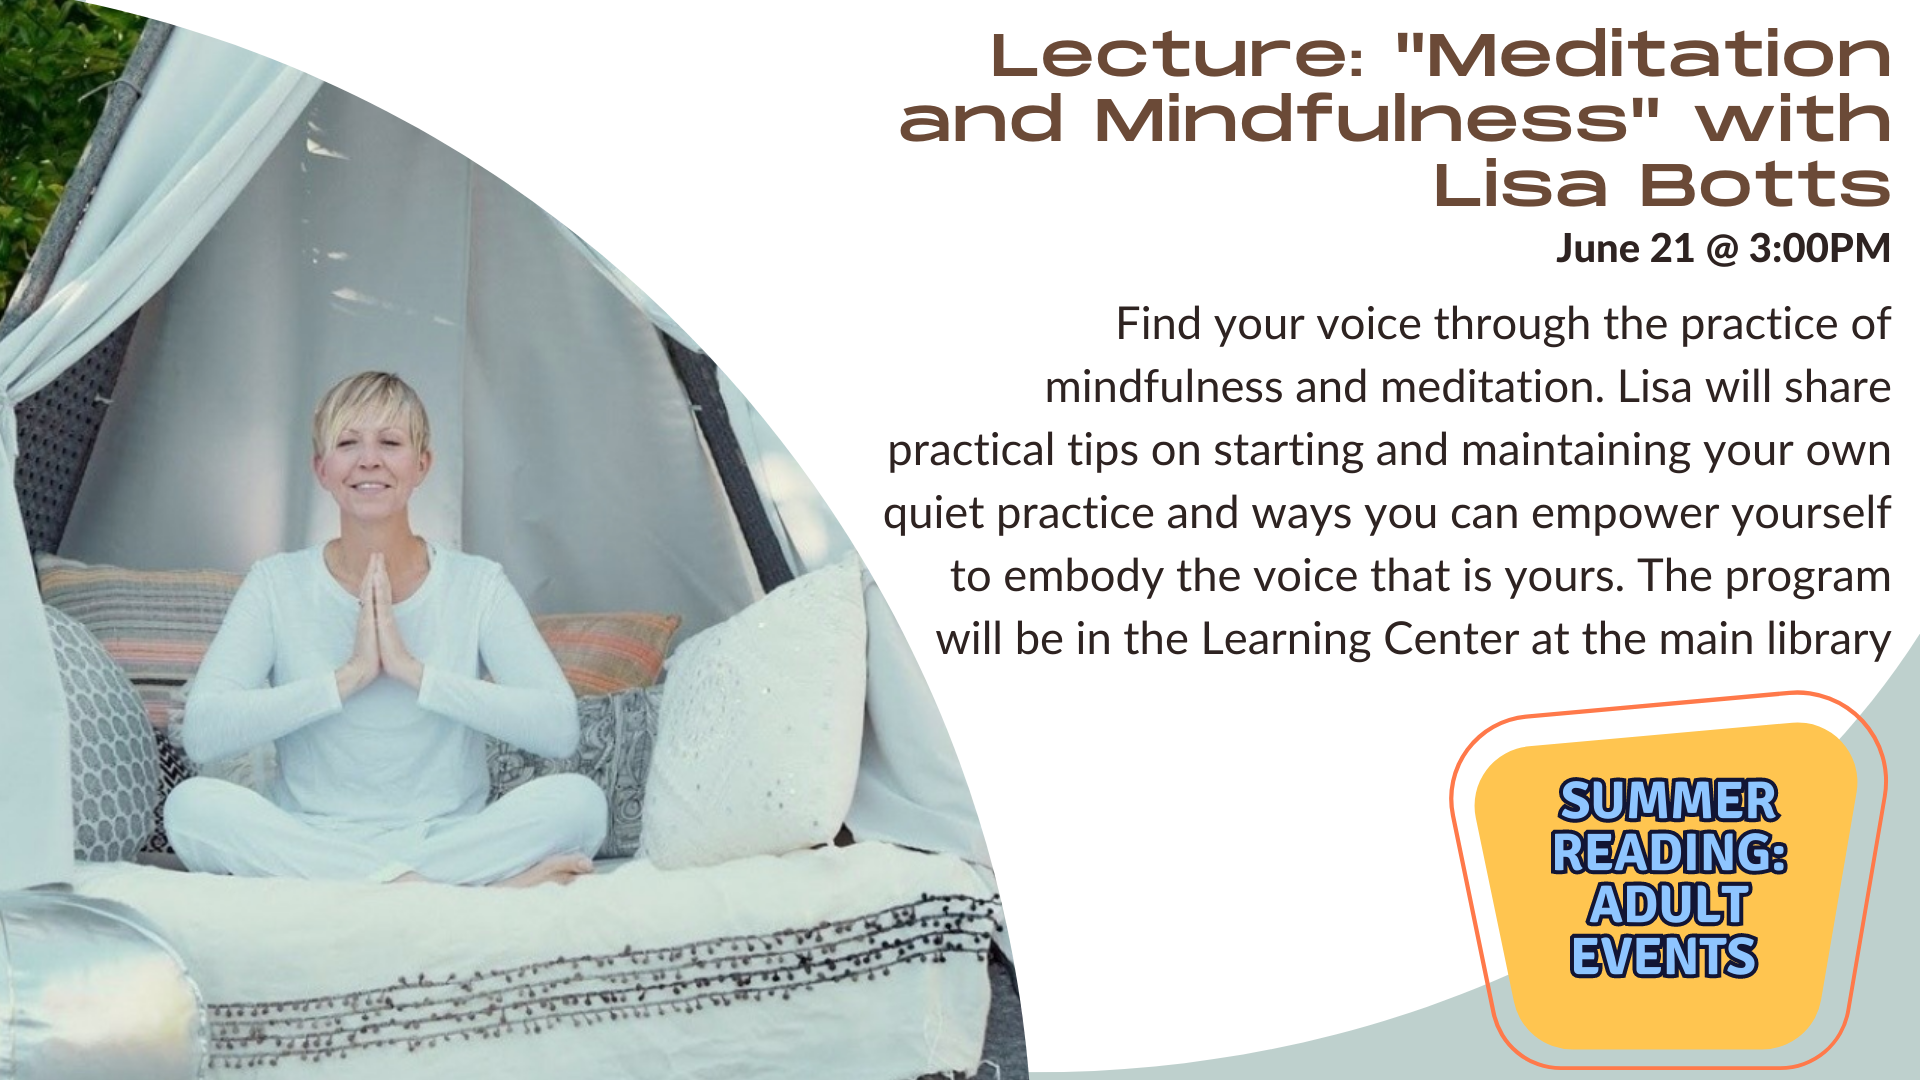 Adult Lectures: "Meditation and Mindfulness, Finding Your Inner Voice" by Lisa Botts June 21st 3:00 PM    